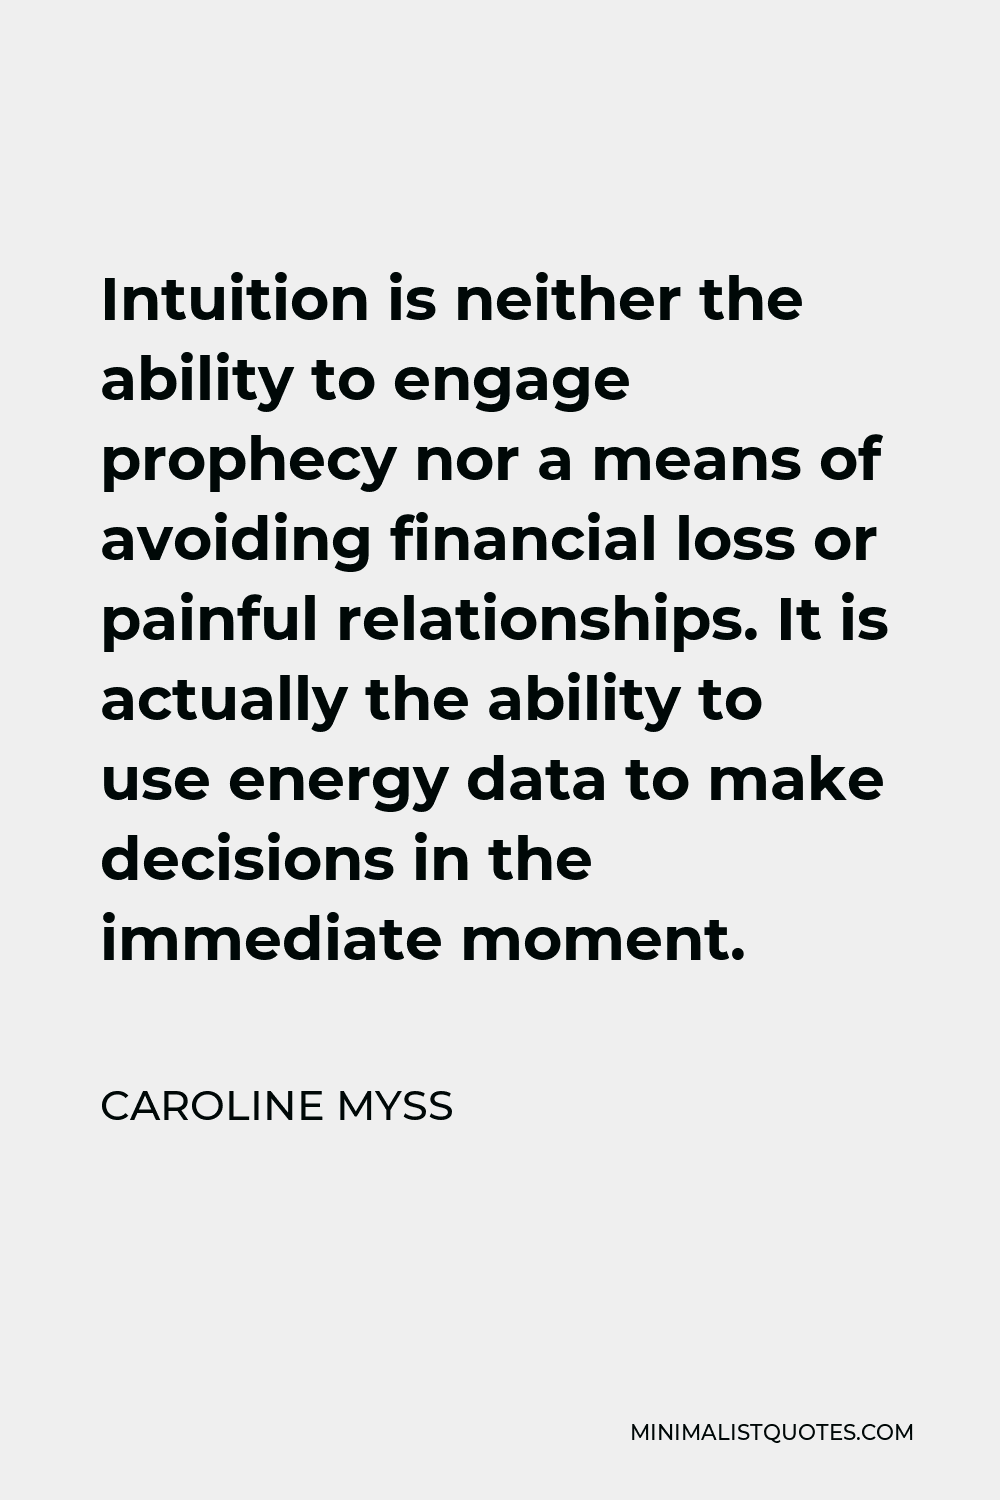 Caroline Myss Quote - Intuition is neither the ability to engage prophecy nor a means of avoiding financial loss or painful relationships. It is actually the ability to use energy data to make decisions in the immediate moment.